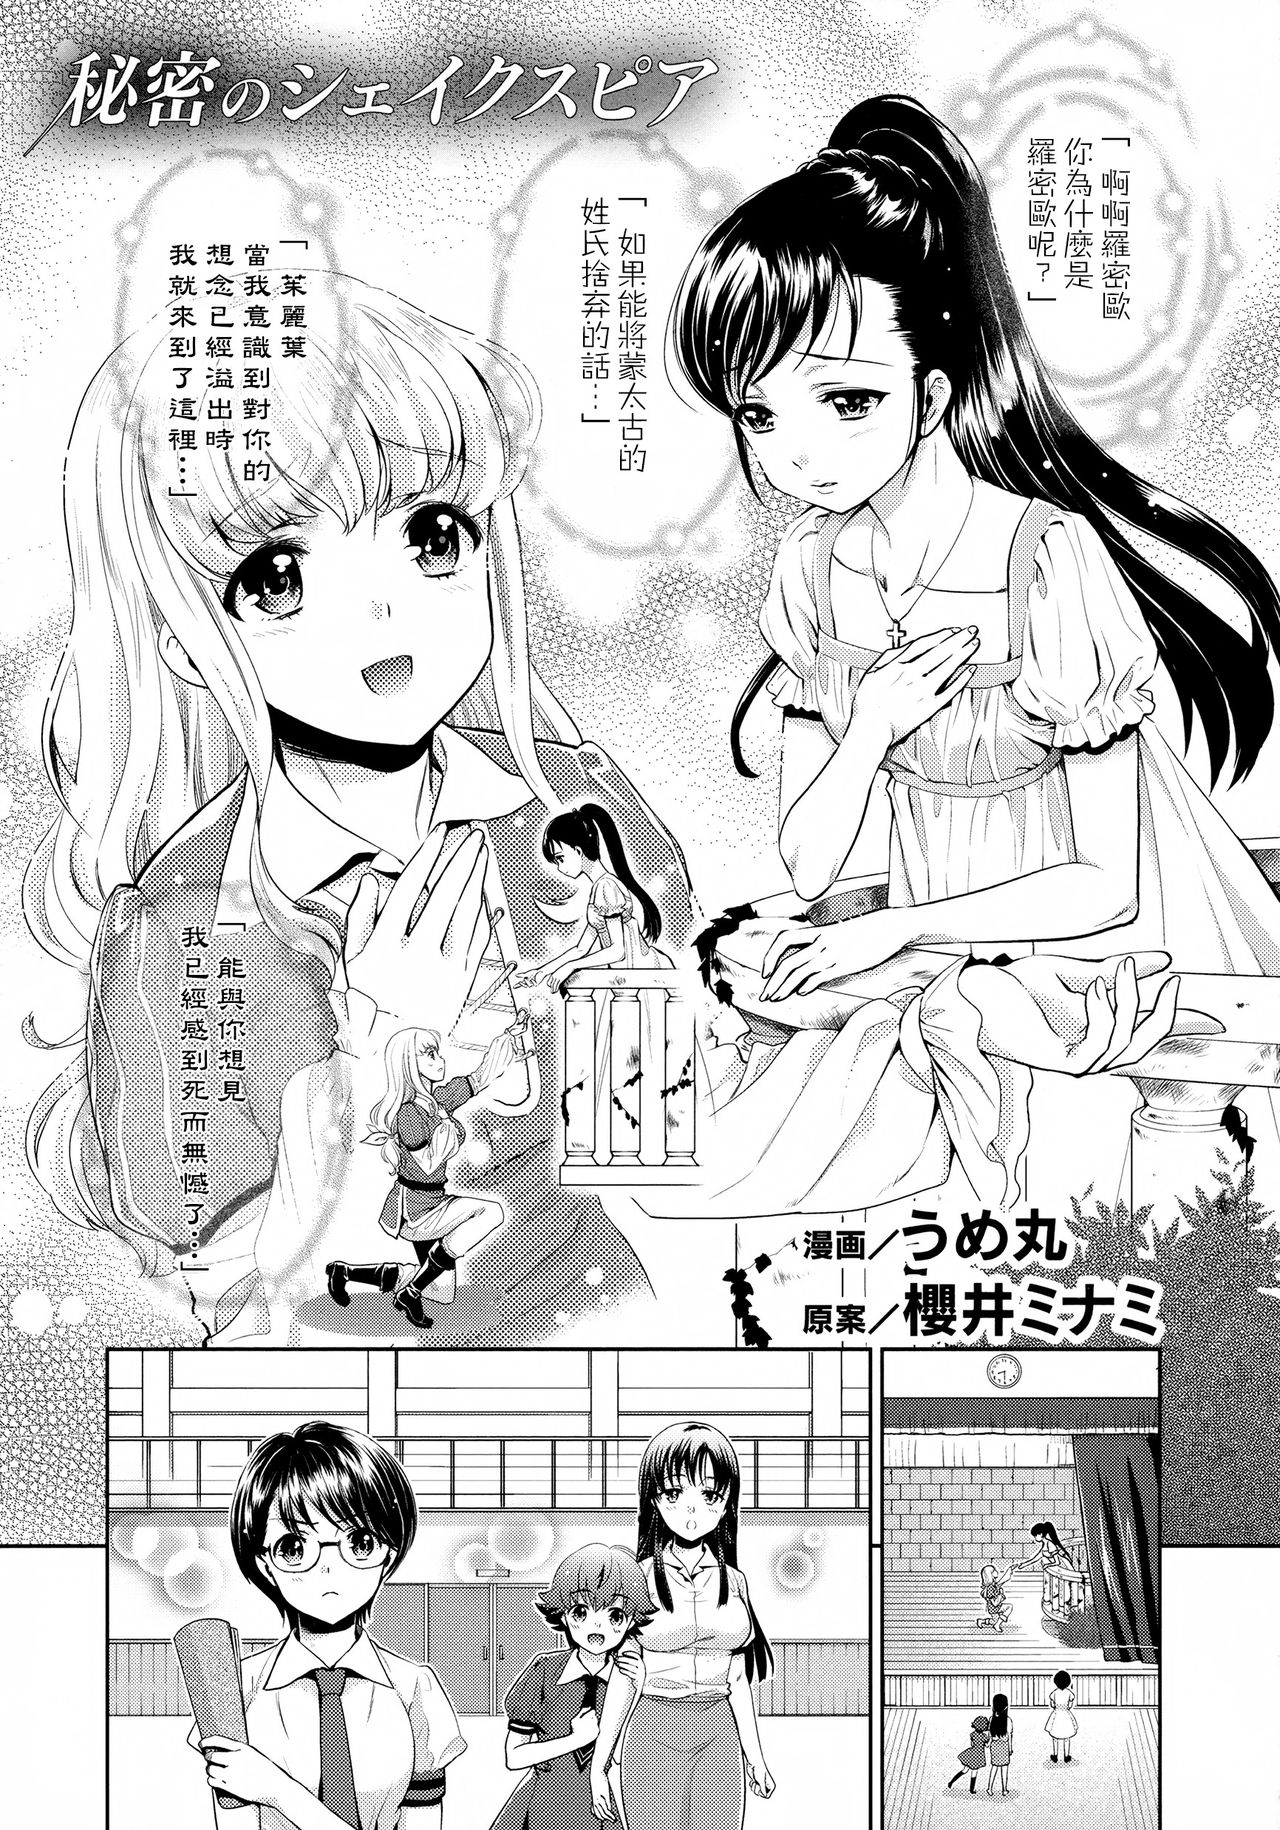 [Anthology] Ao Yuri -Story Of Club Activities- [Chinese] [无毒汉化组] [Incomplete] [アンソロジー] 青百合 -Story Of Club Activities- [中国翻訳] [ページ欠落]